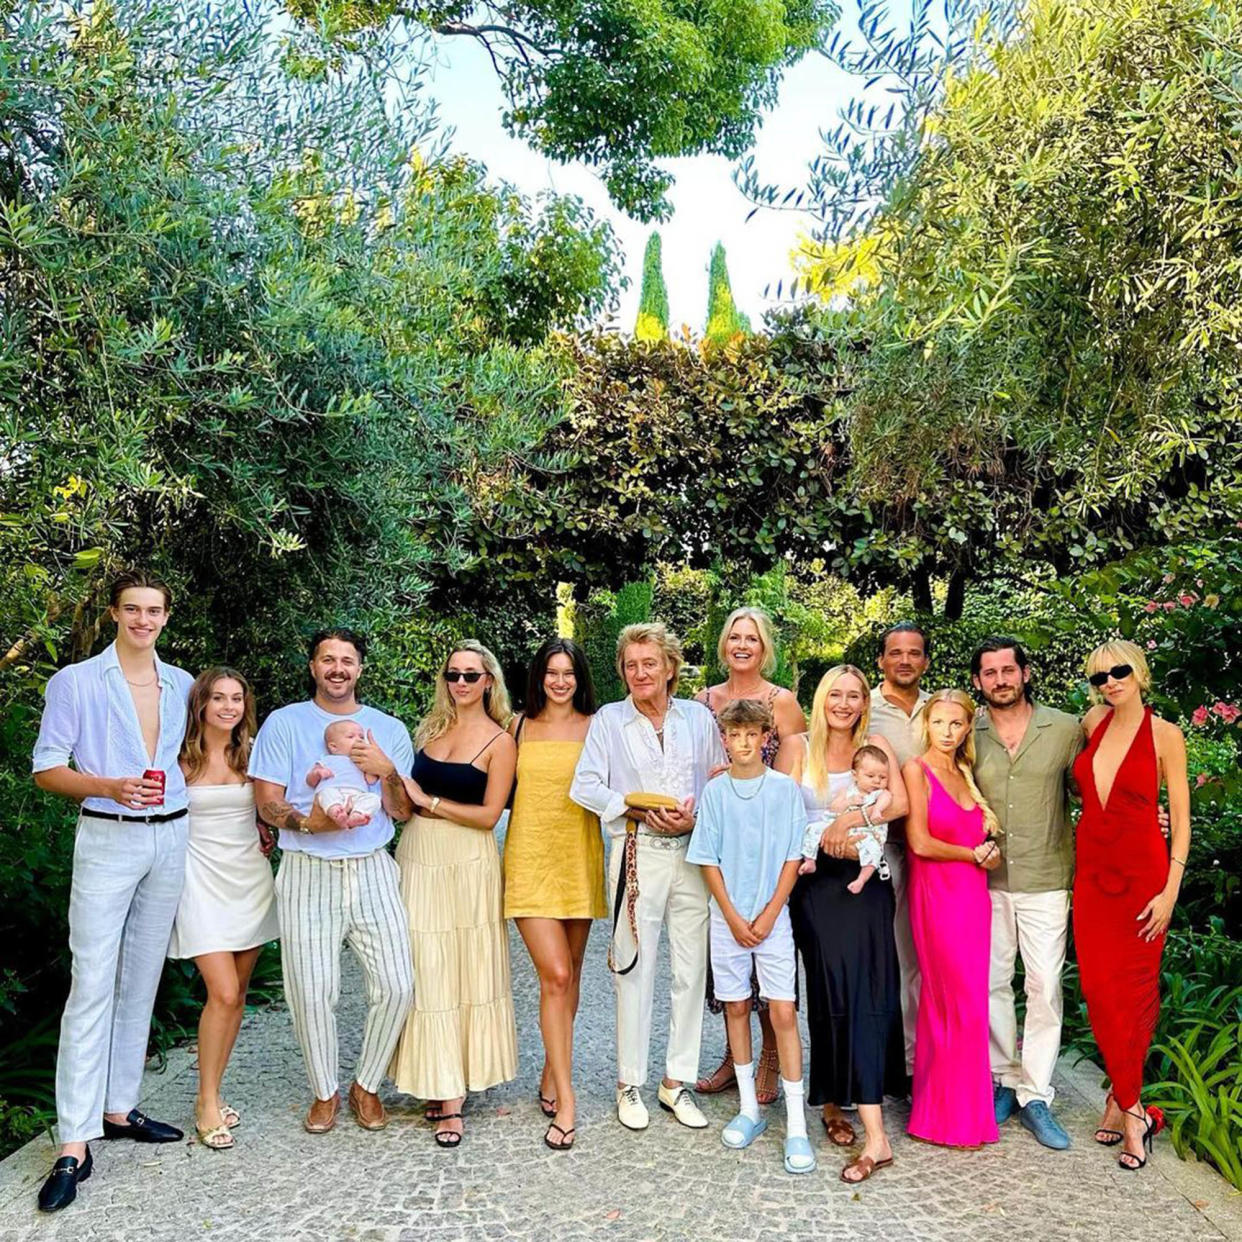 Rod Stewart posed for a family photo while touring in Europe. (@penny.lancaster via Instagram)